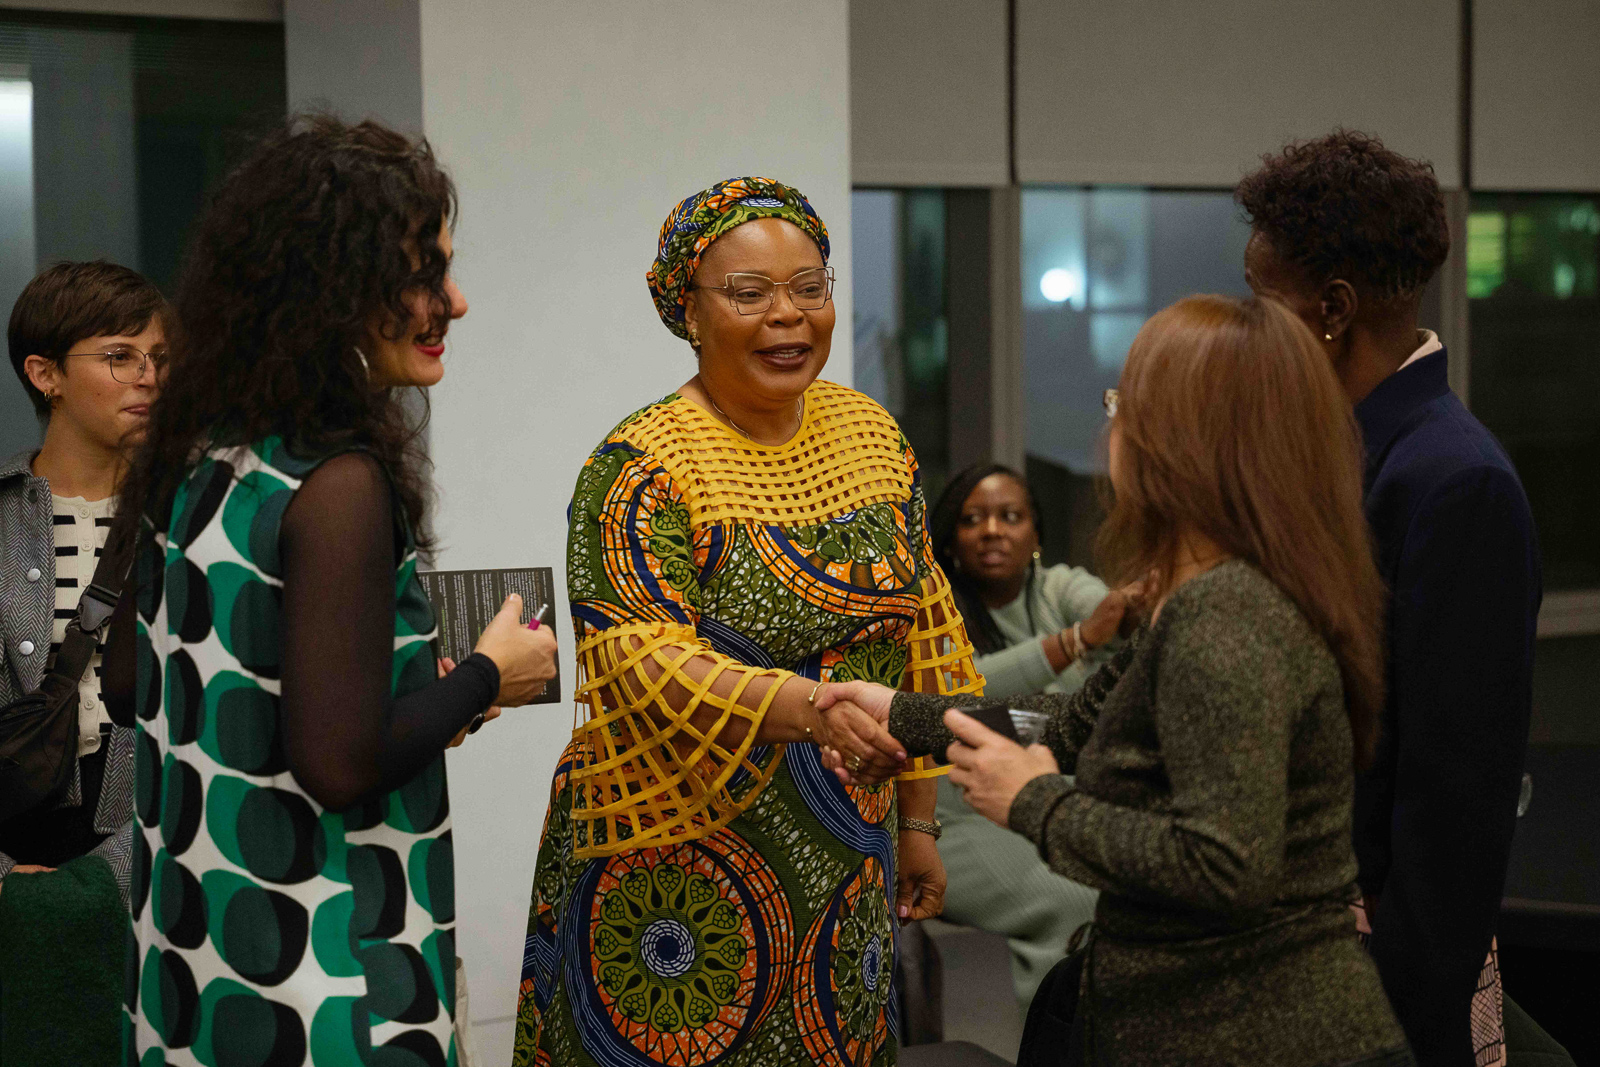 Institute Executive Director Leymah Gbowee in conversation with some Global Forum attendees at CUNY School of Law.